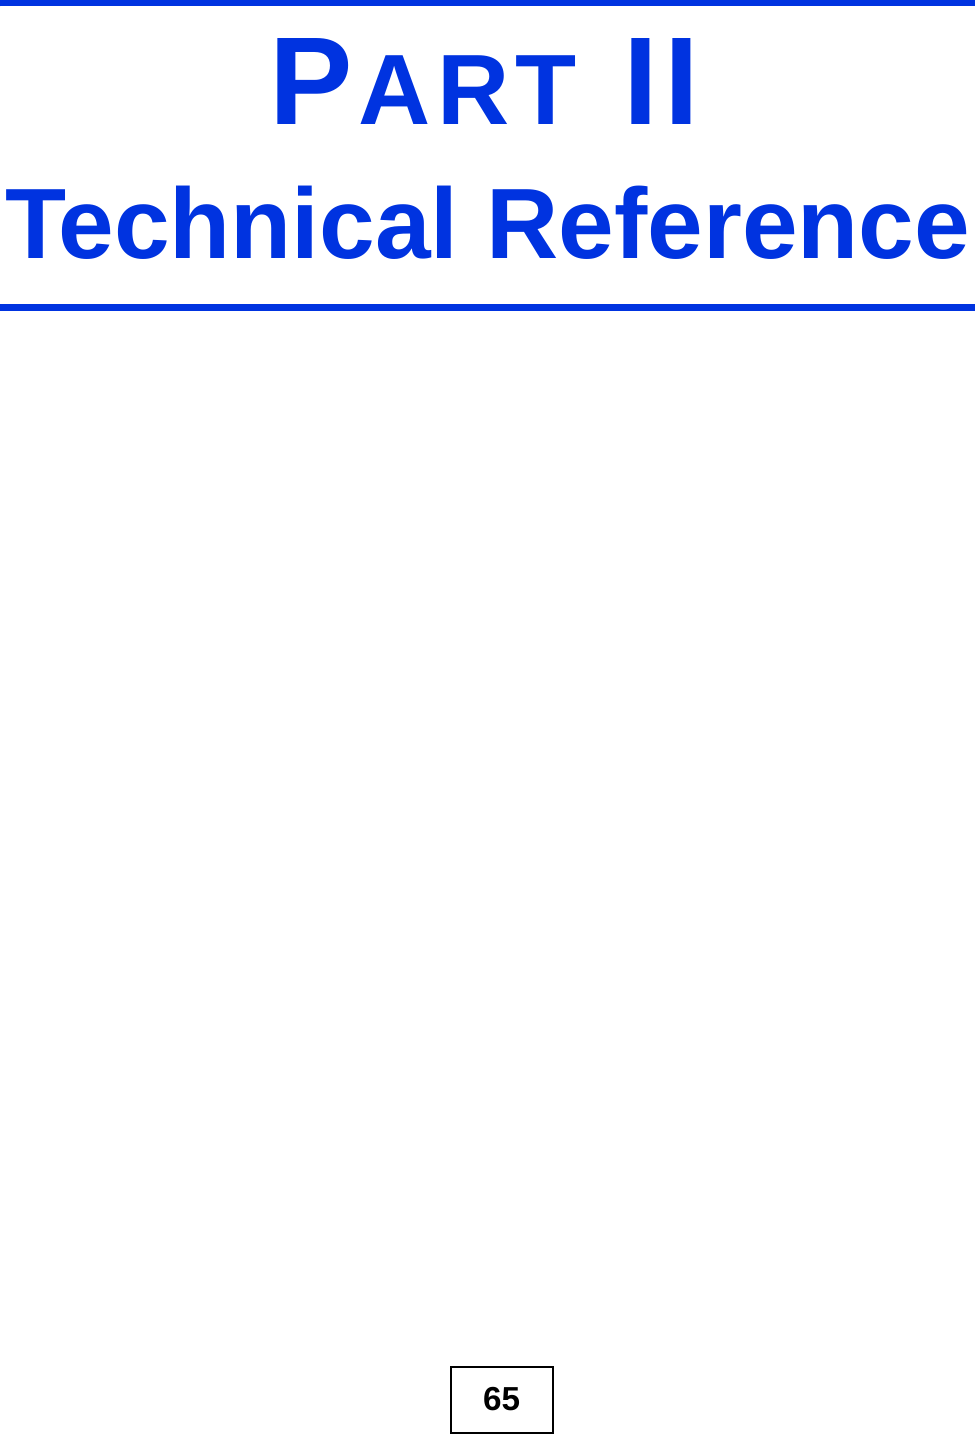 65PART IITechnical Reference